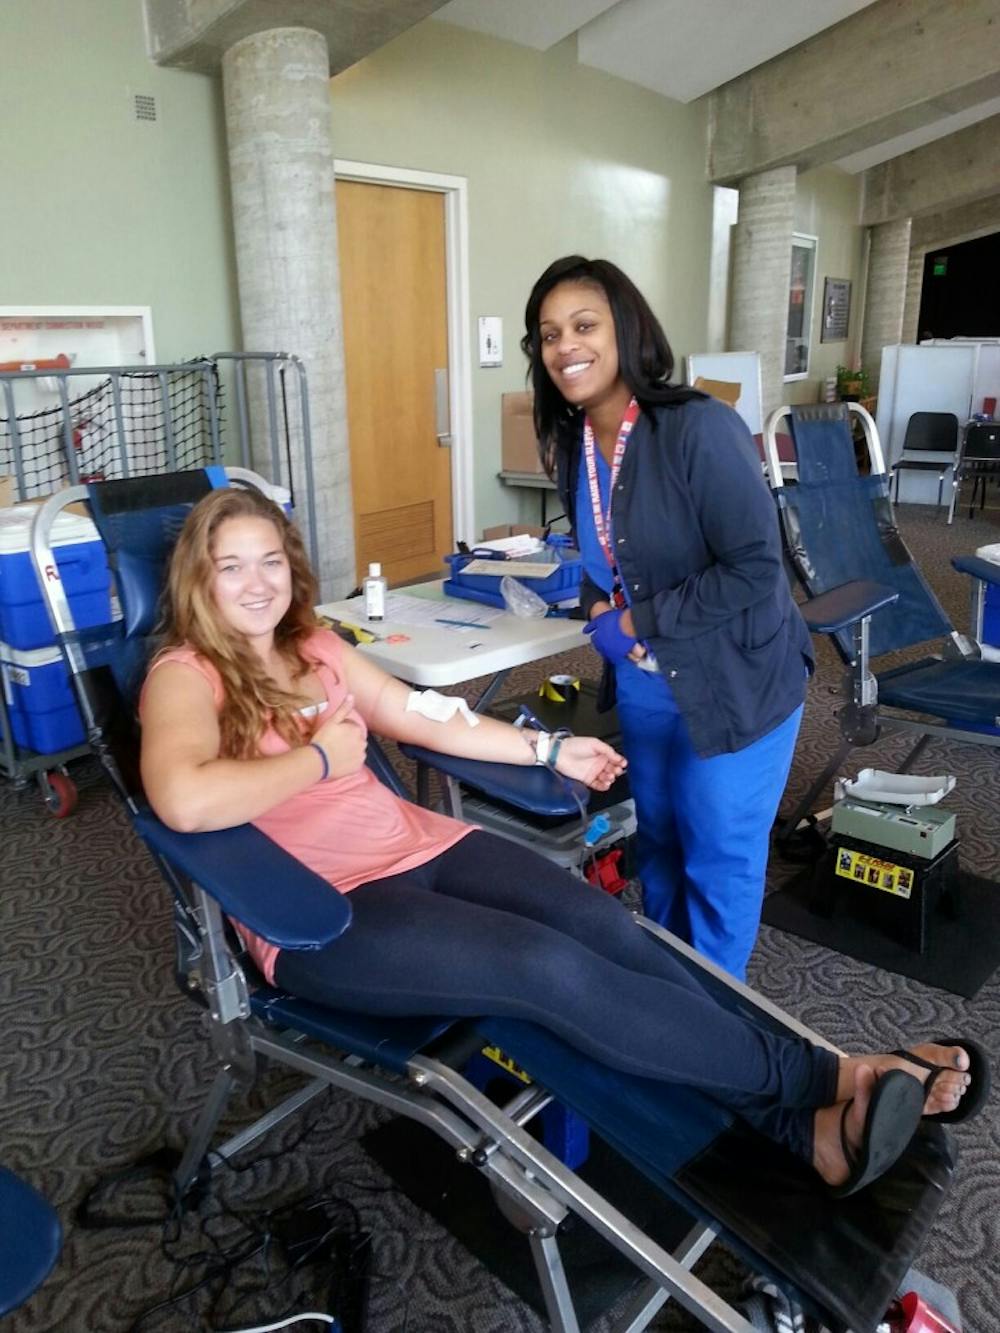 <p><strong>Ball State student Crystal Nichols</strong> poses for a photo while giving blood with the help of Indiana Blood Center blood technician Evadnie Turner on Sept. 9 at Pruis Hall as part of the Live to Give event. <em>PHOTO PROVIDED BY  LUCY WEHKING</em></p>